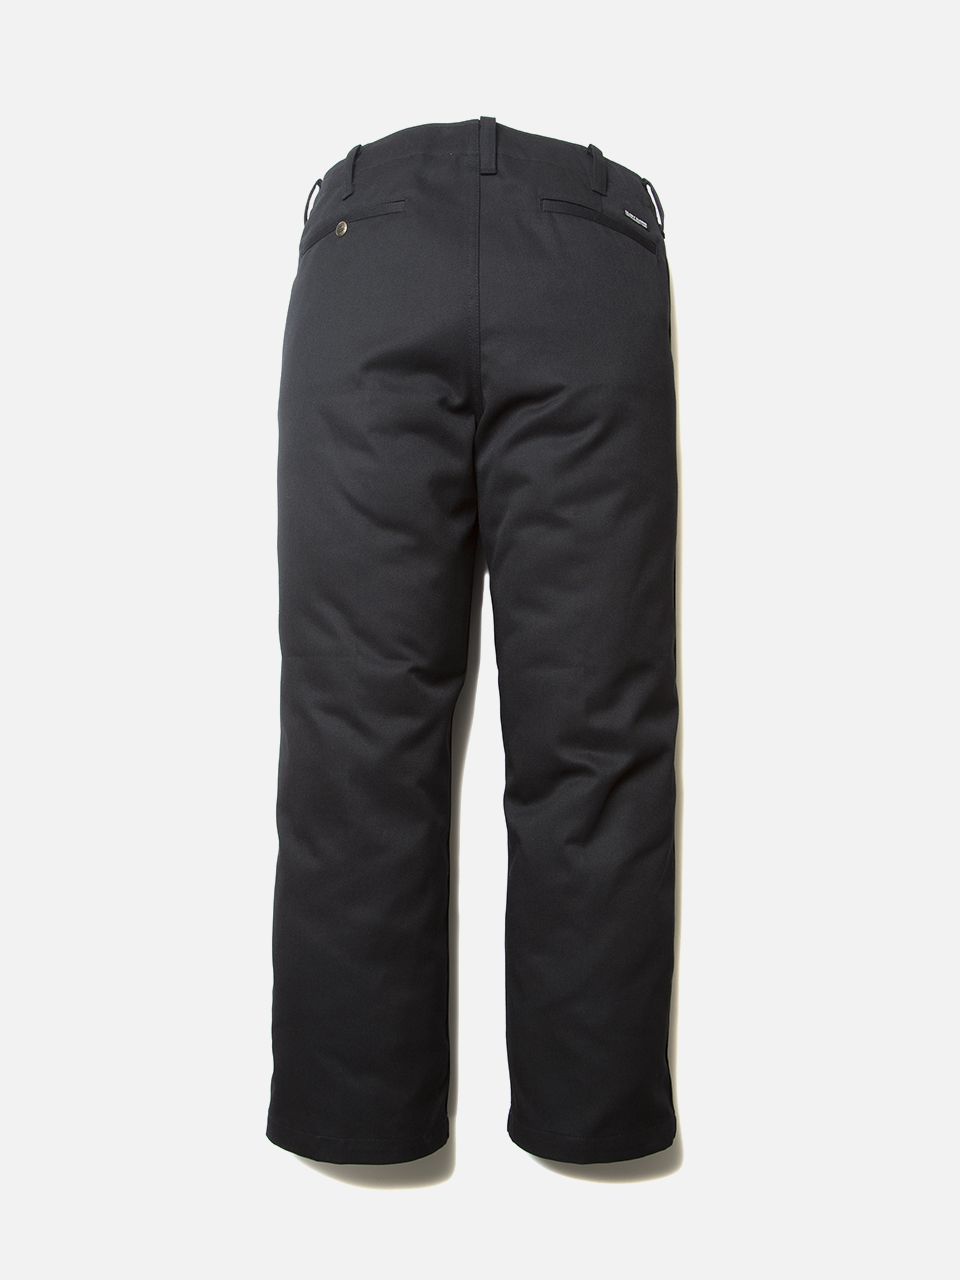 COOTIE   T/C  WORK TROUSERS ASH  GRAY